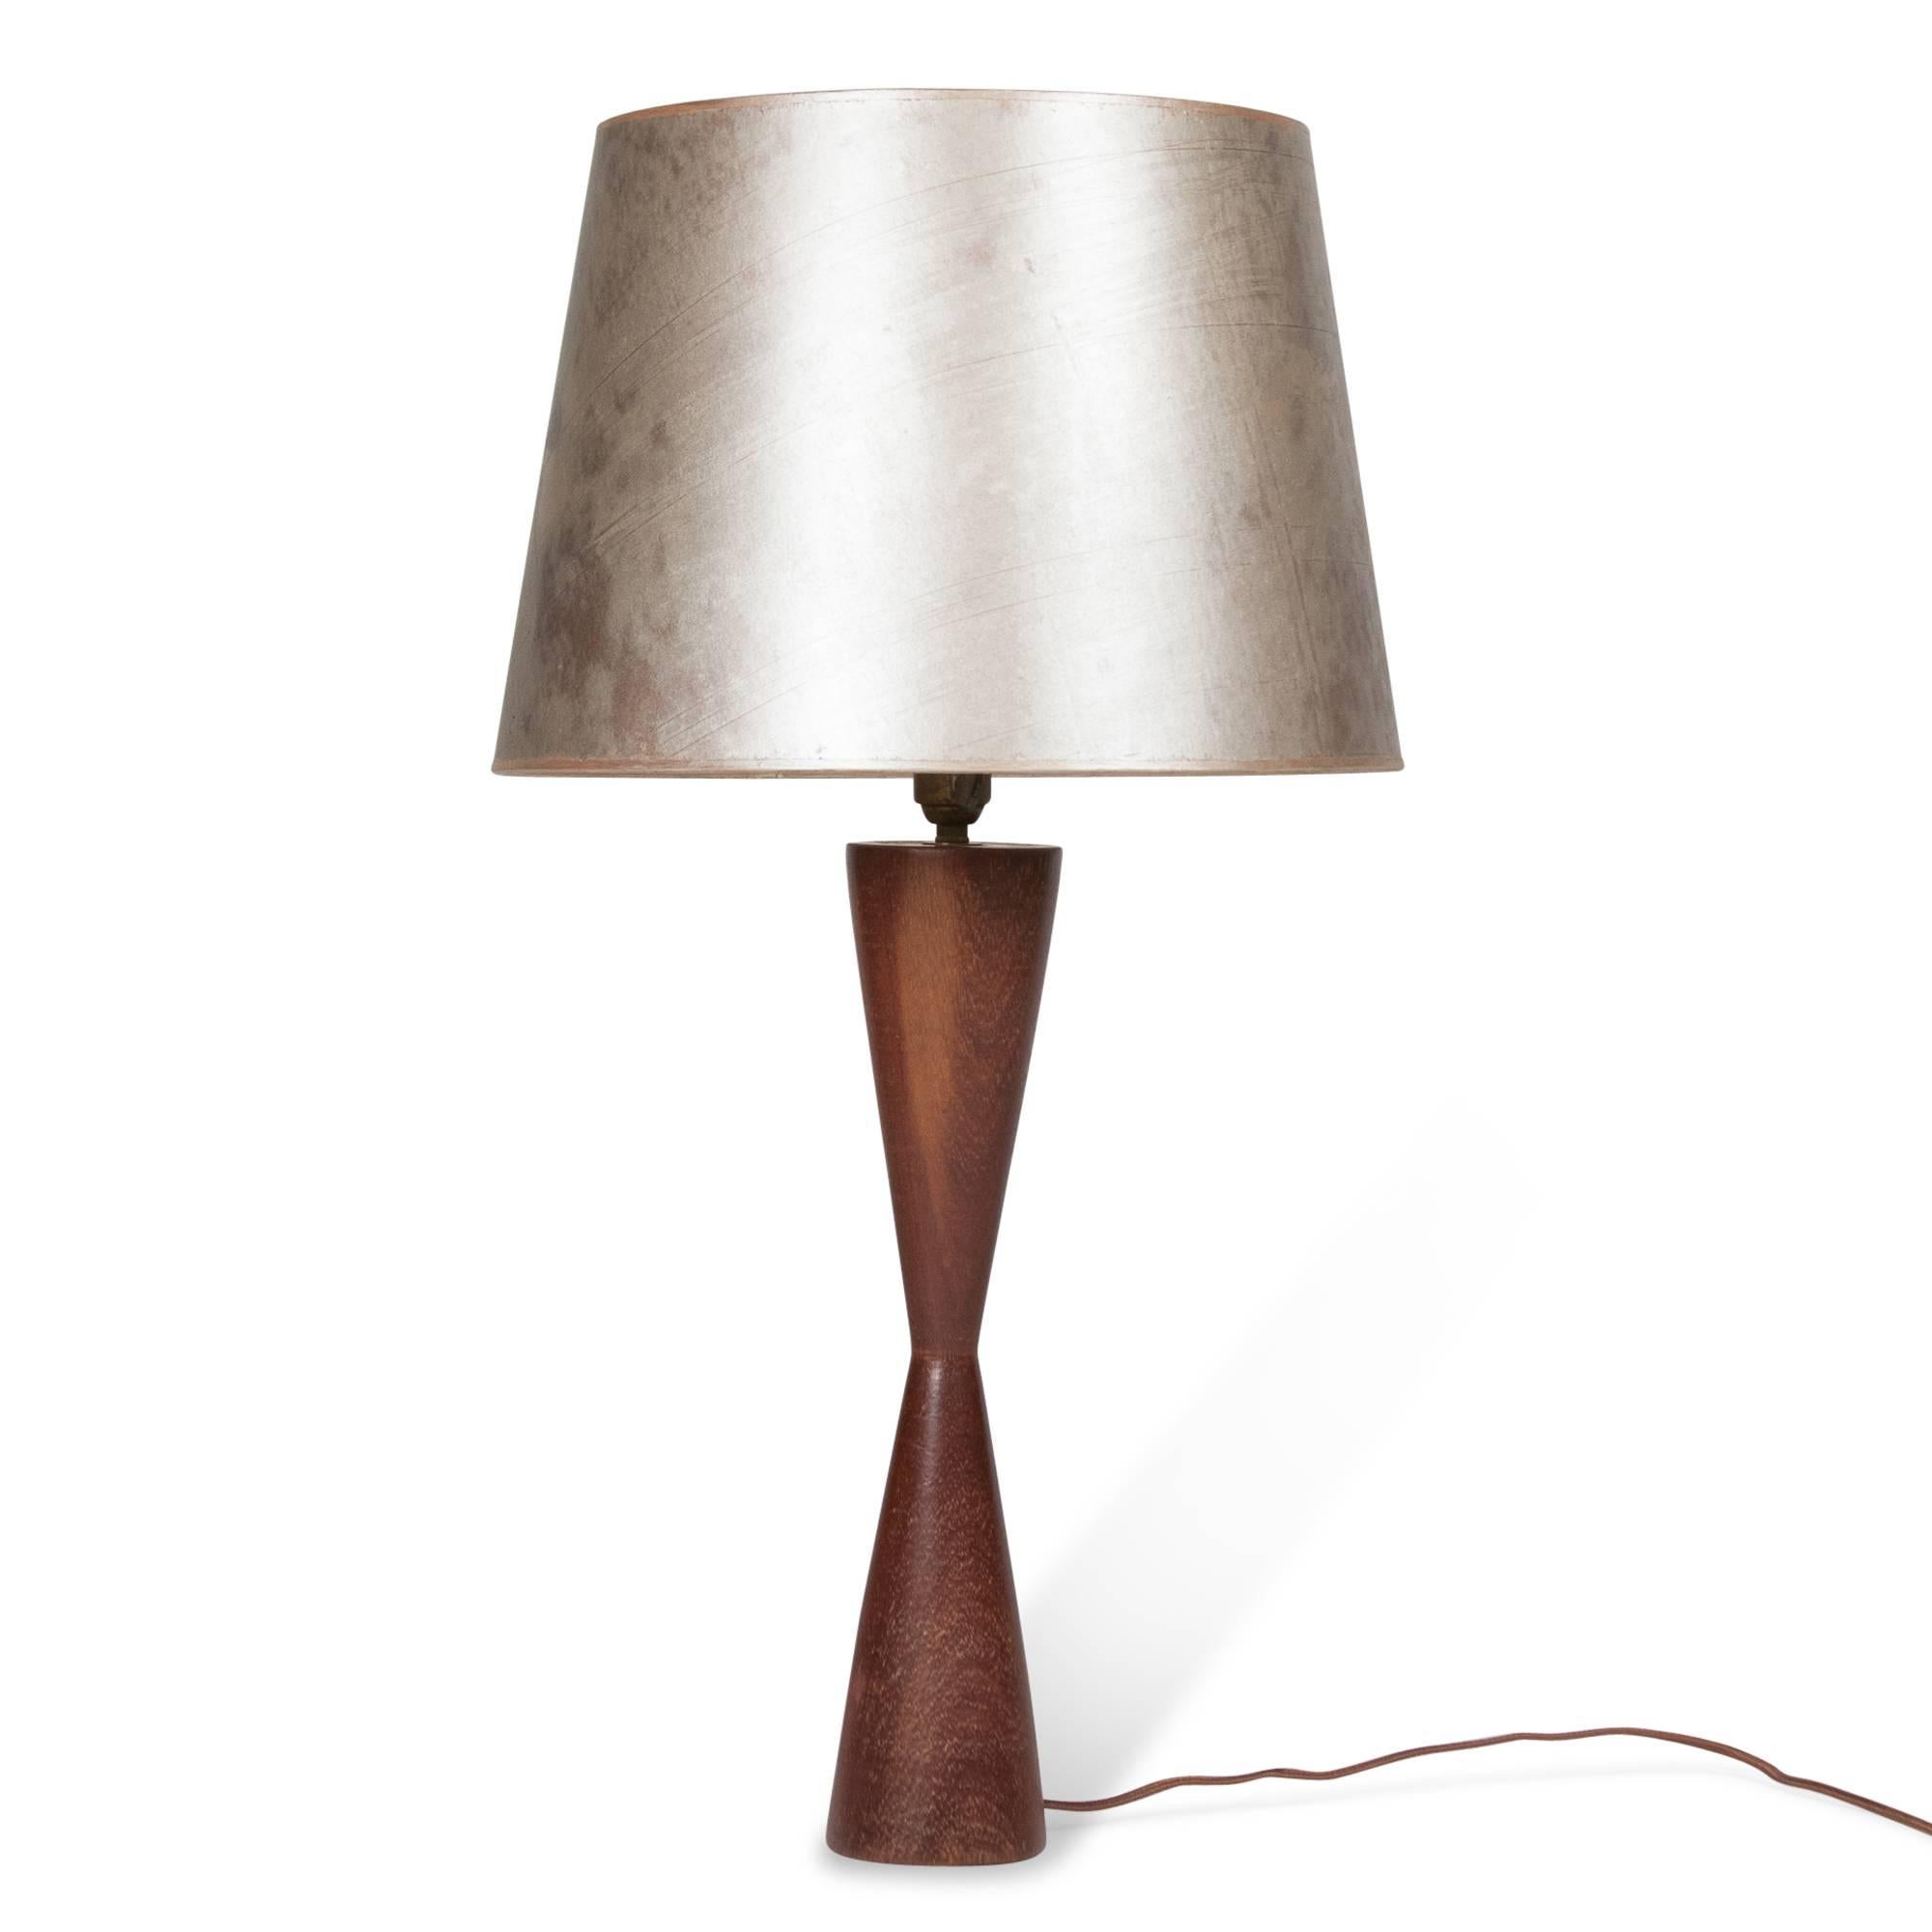 Turned Walnut Table Lamp, Danish, 1950s In Excellent Condition For Sale In Hoboken, NJ